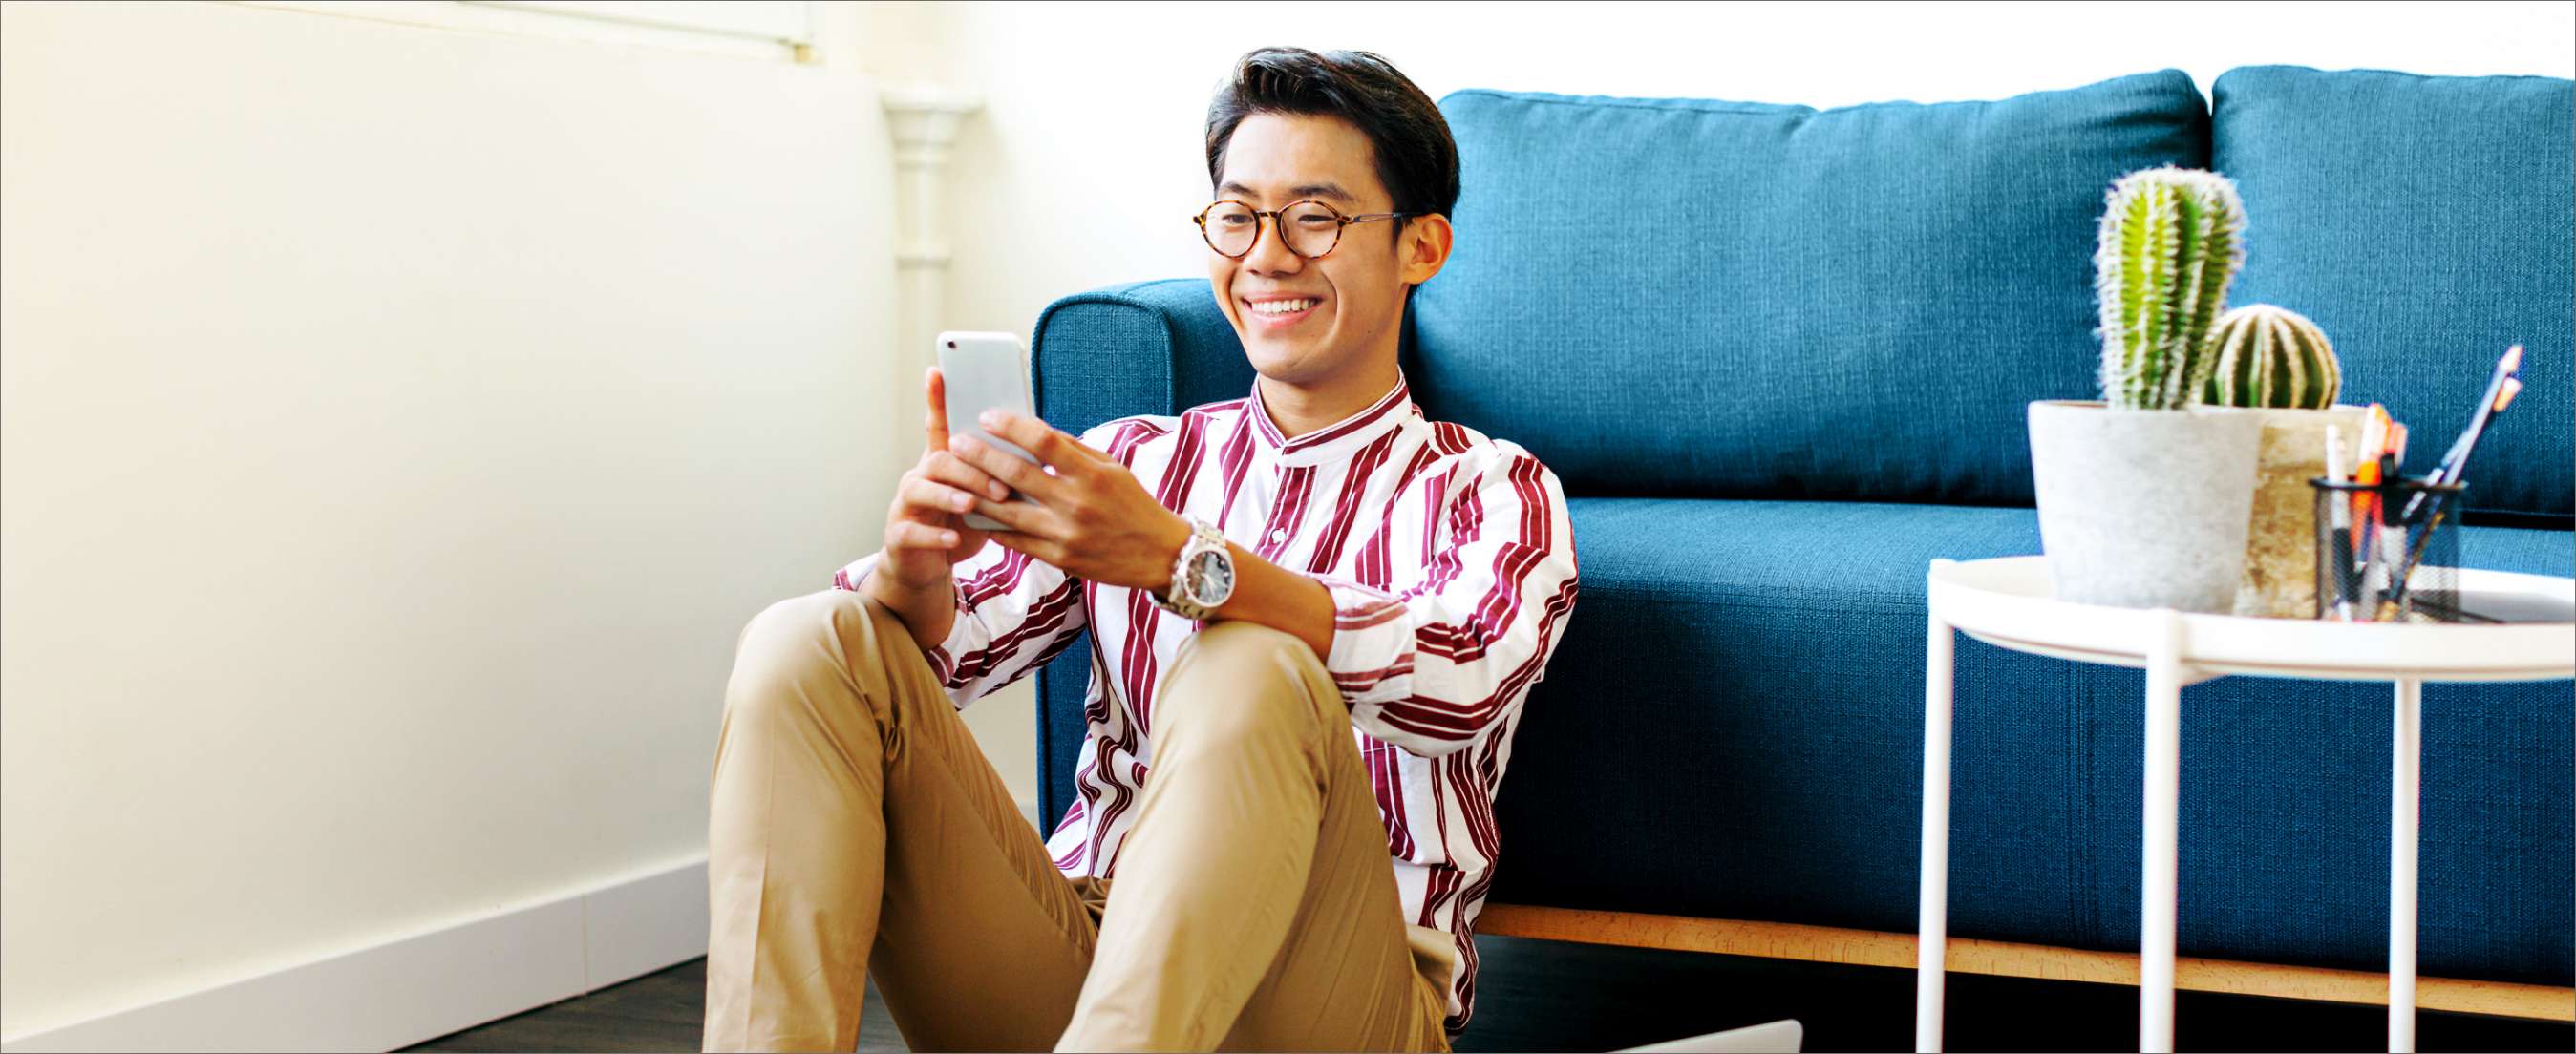 A young Asian man with glasses sits on the floor of his living room. His back is pressed up against a blue couch and he's smiling at his phone.